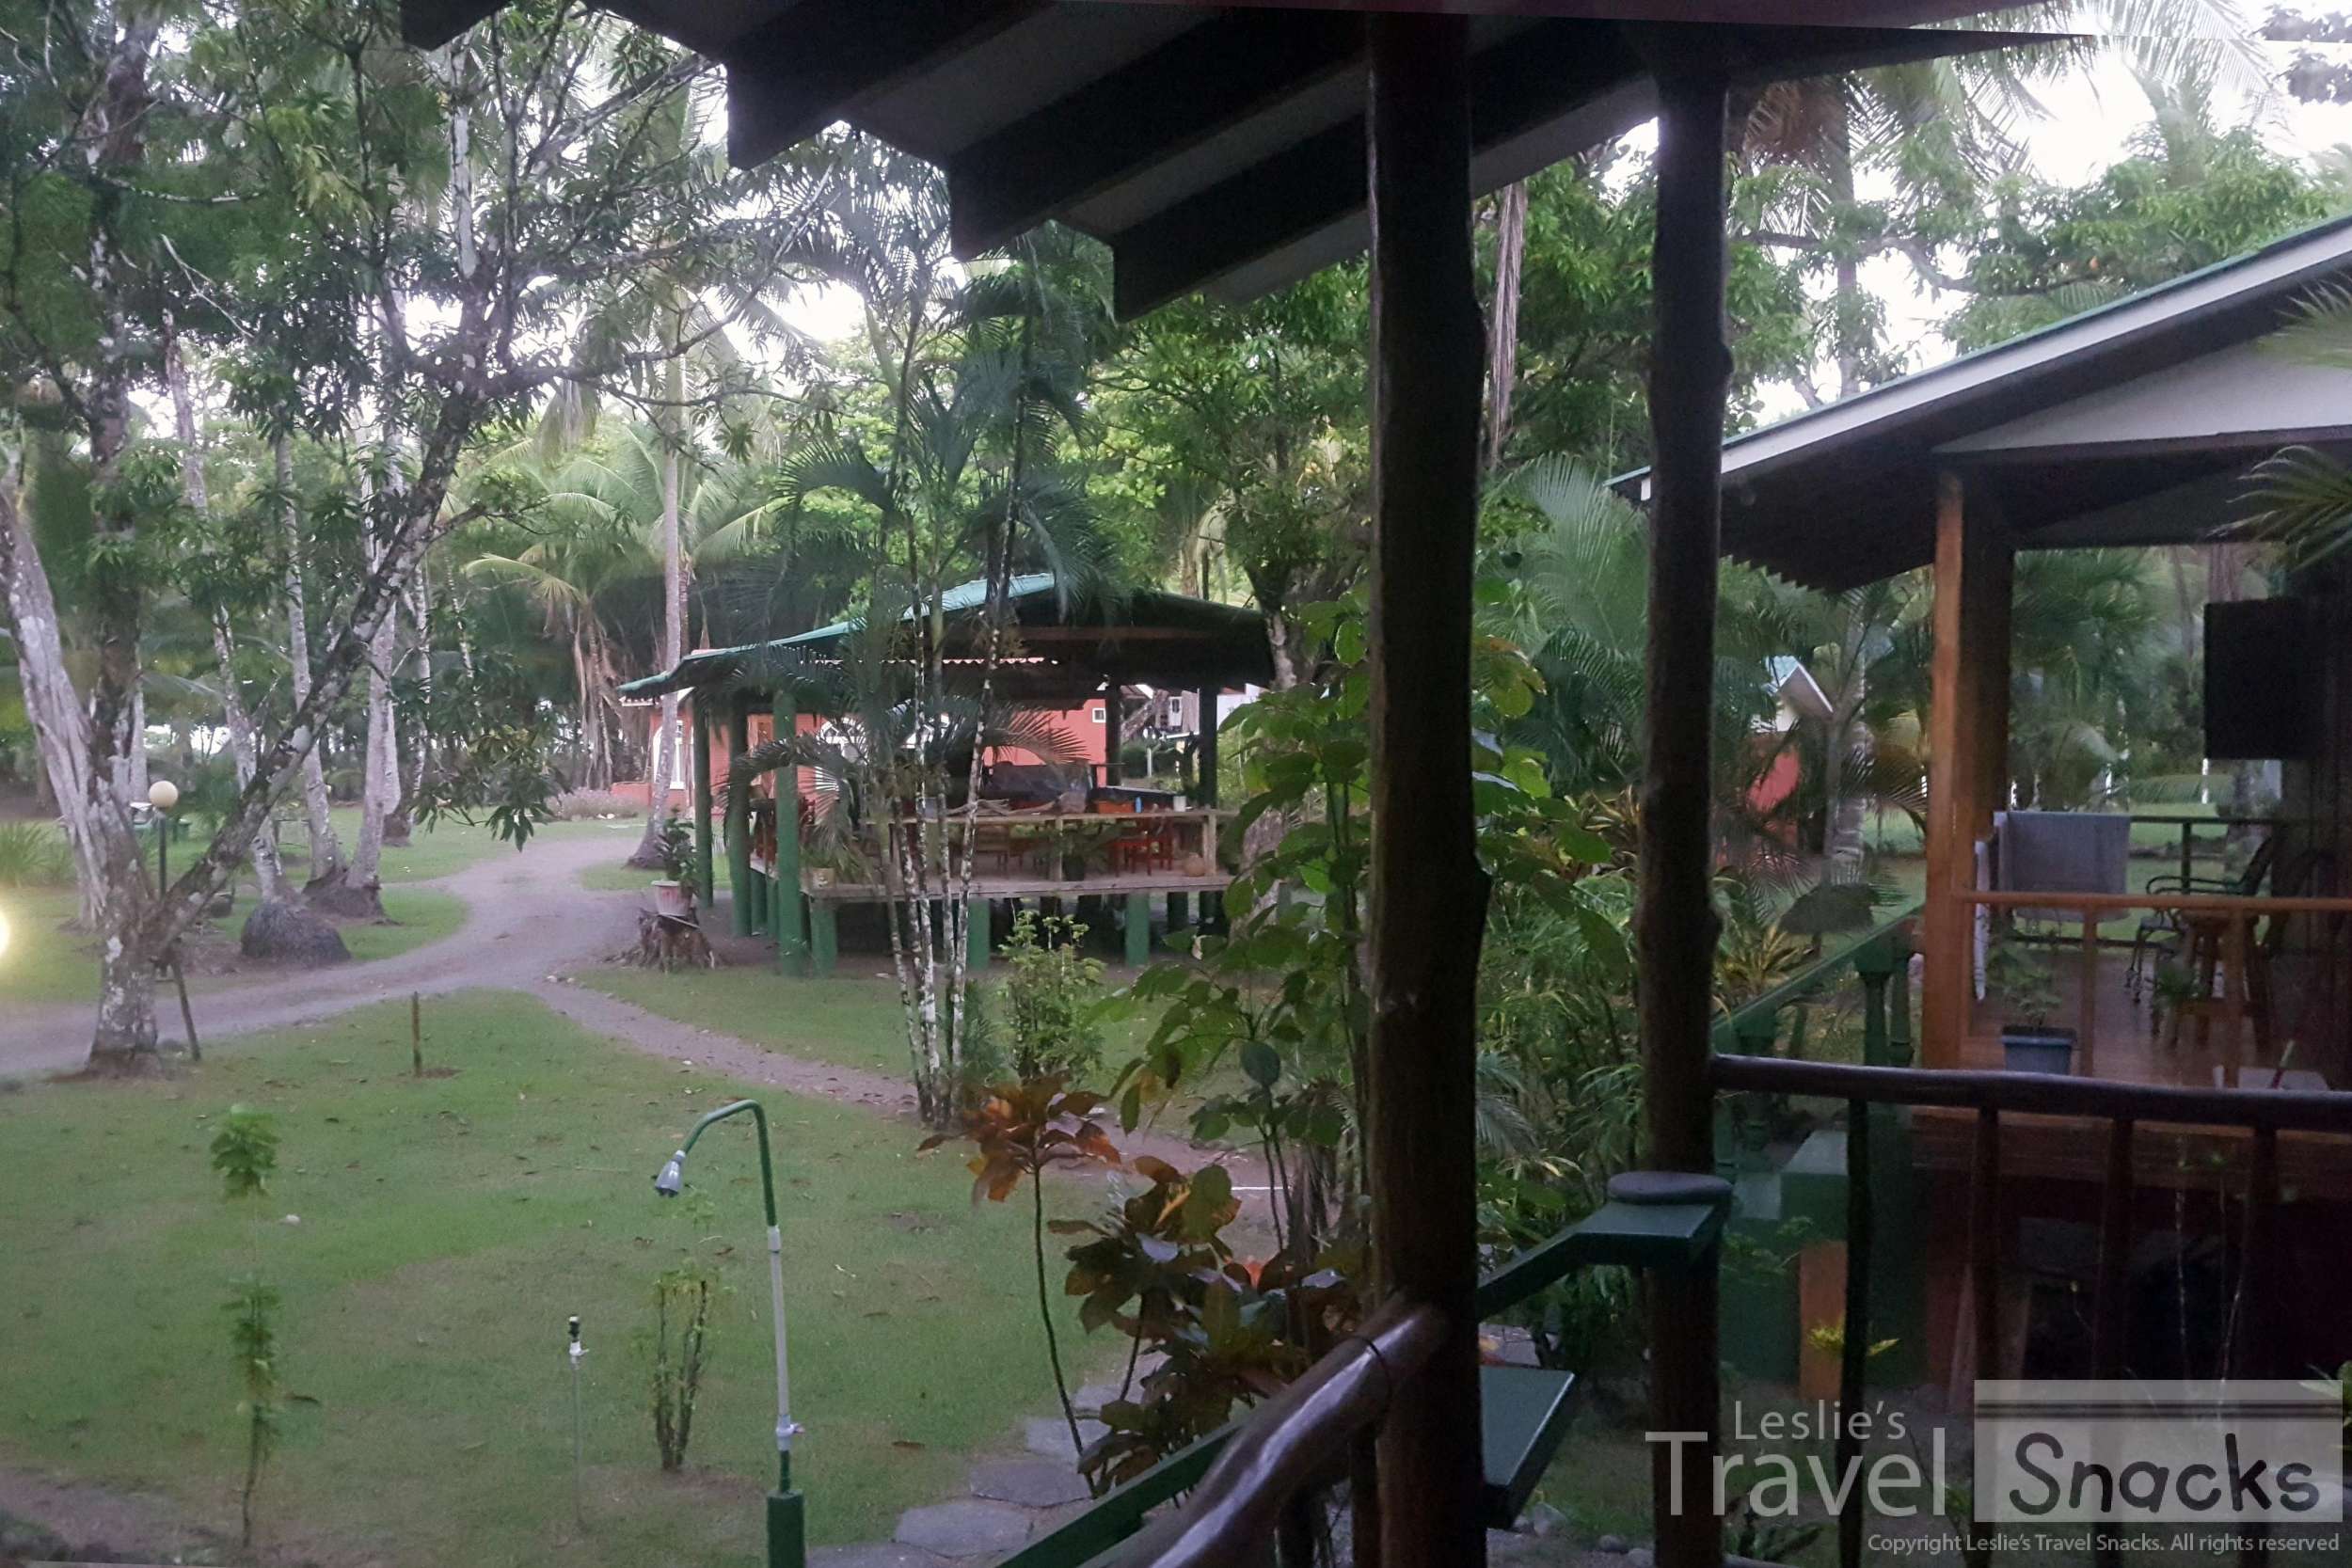 This is taken from the deck of my Costa RIca jungle beach cabina, looking out toward the rancho.